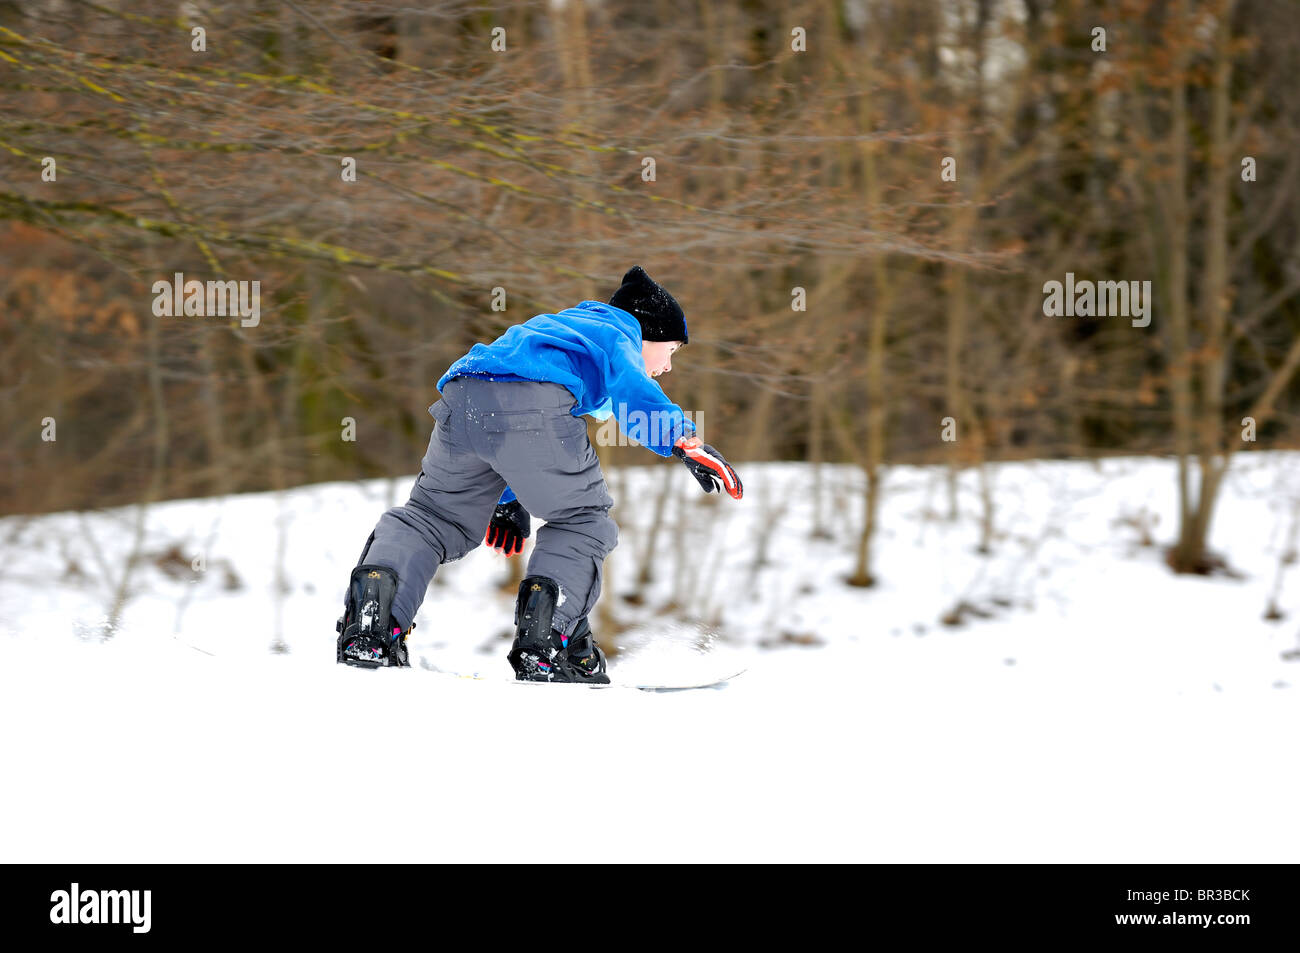 Young Snowboarder at full speed Stock Photo